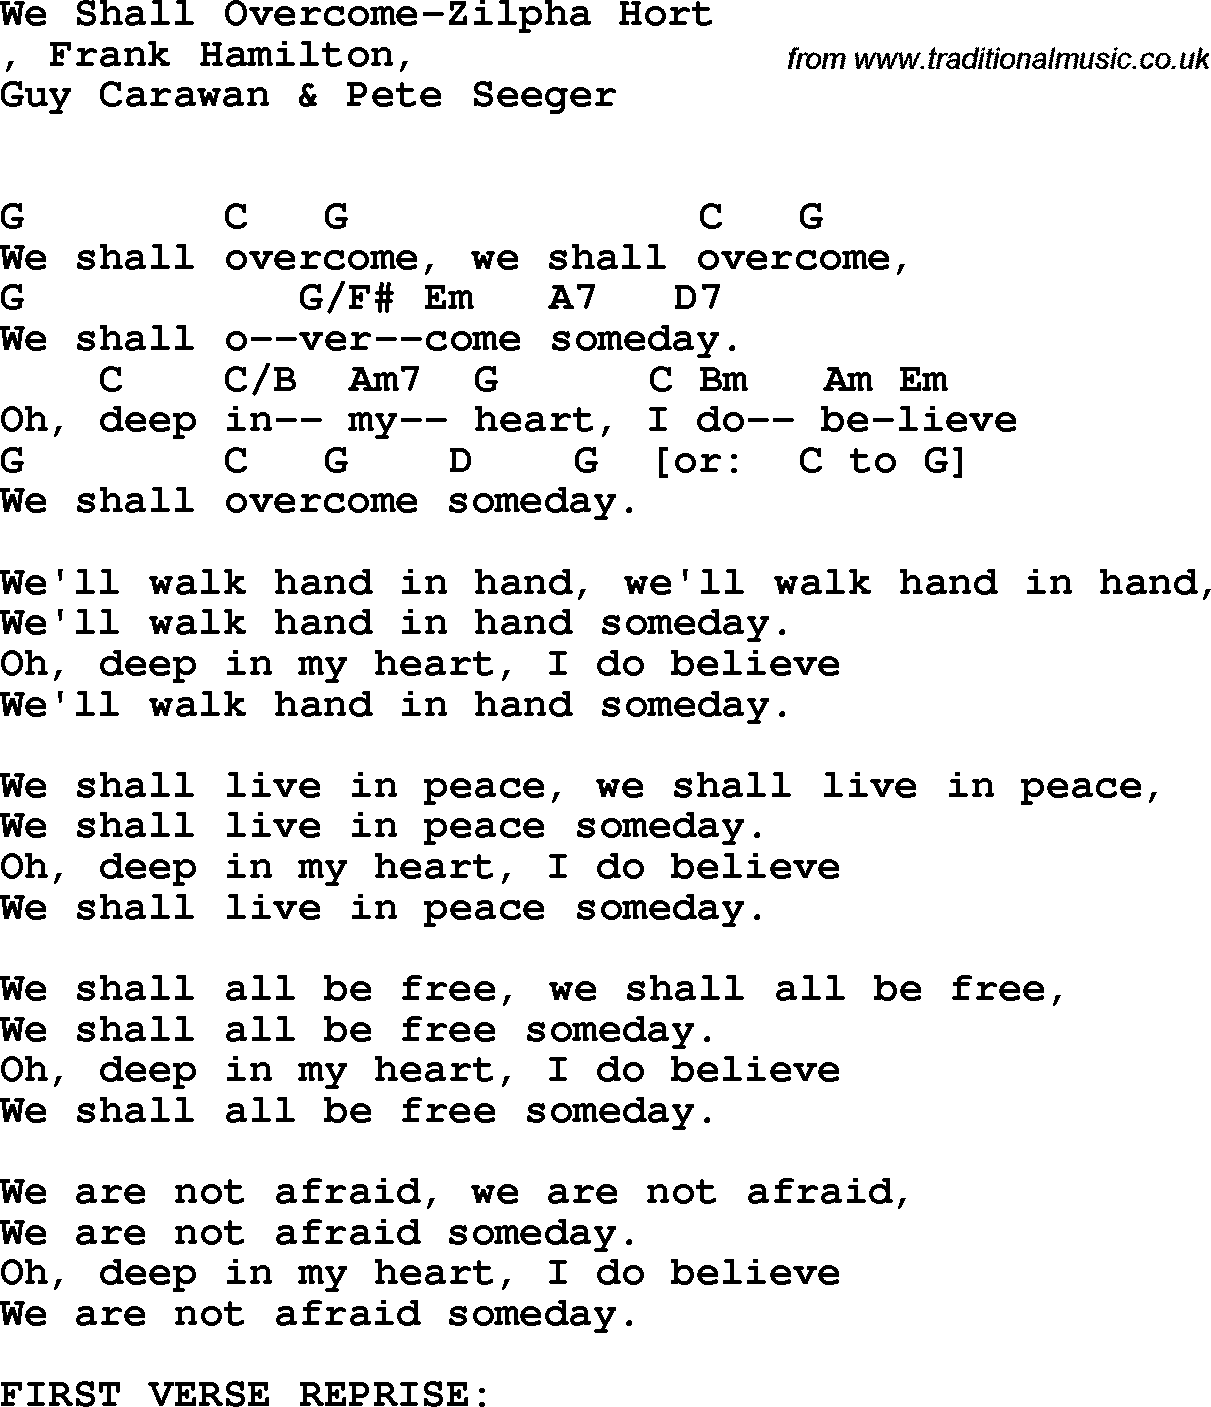 Protest Song We Shall Overcome-Zilpha Hort lyrics and chords